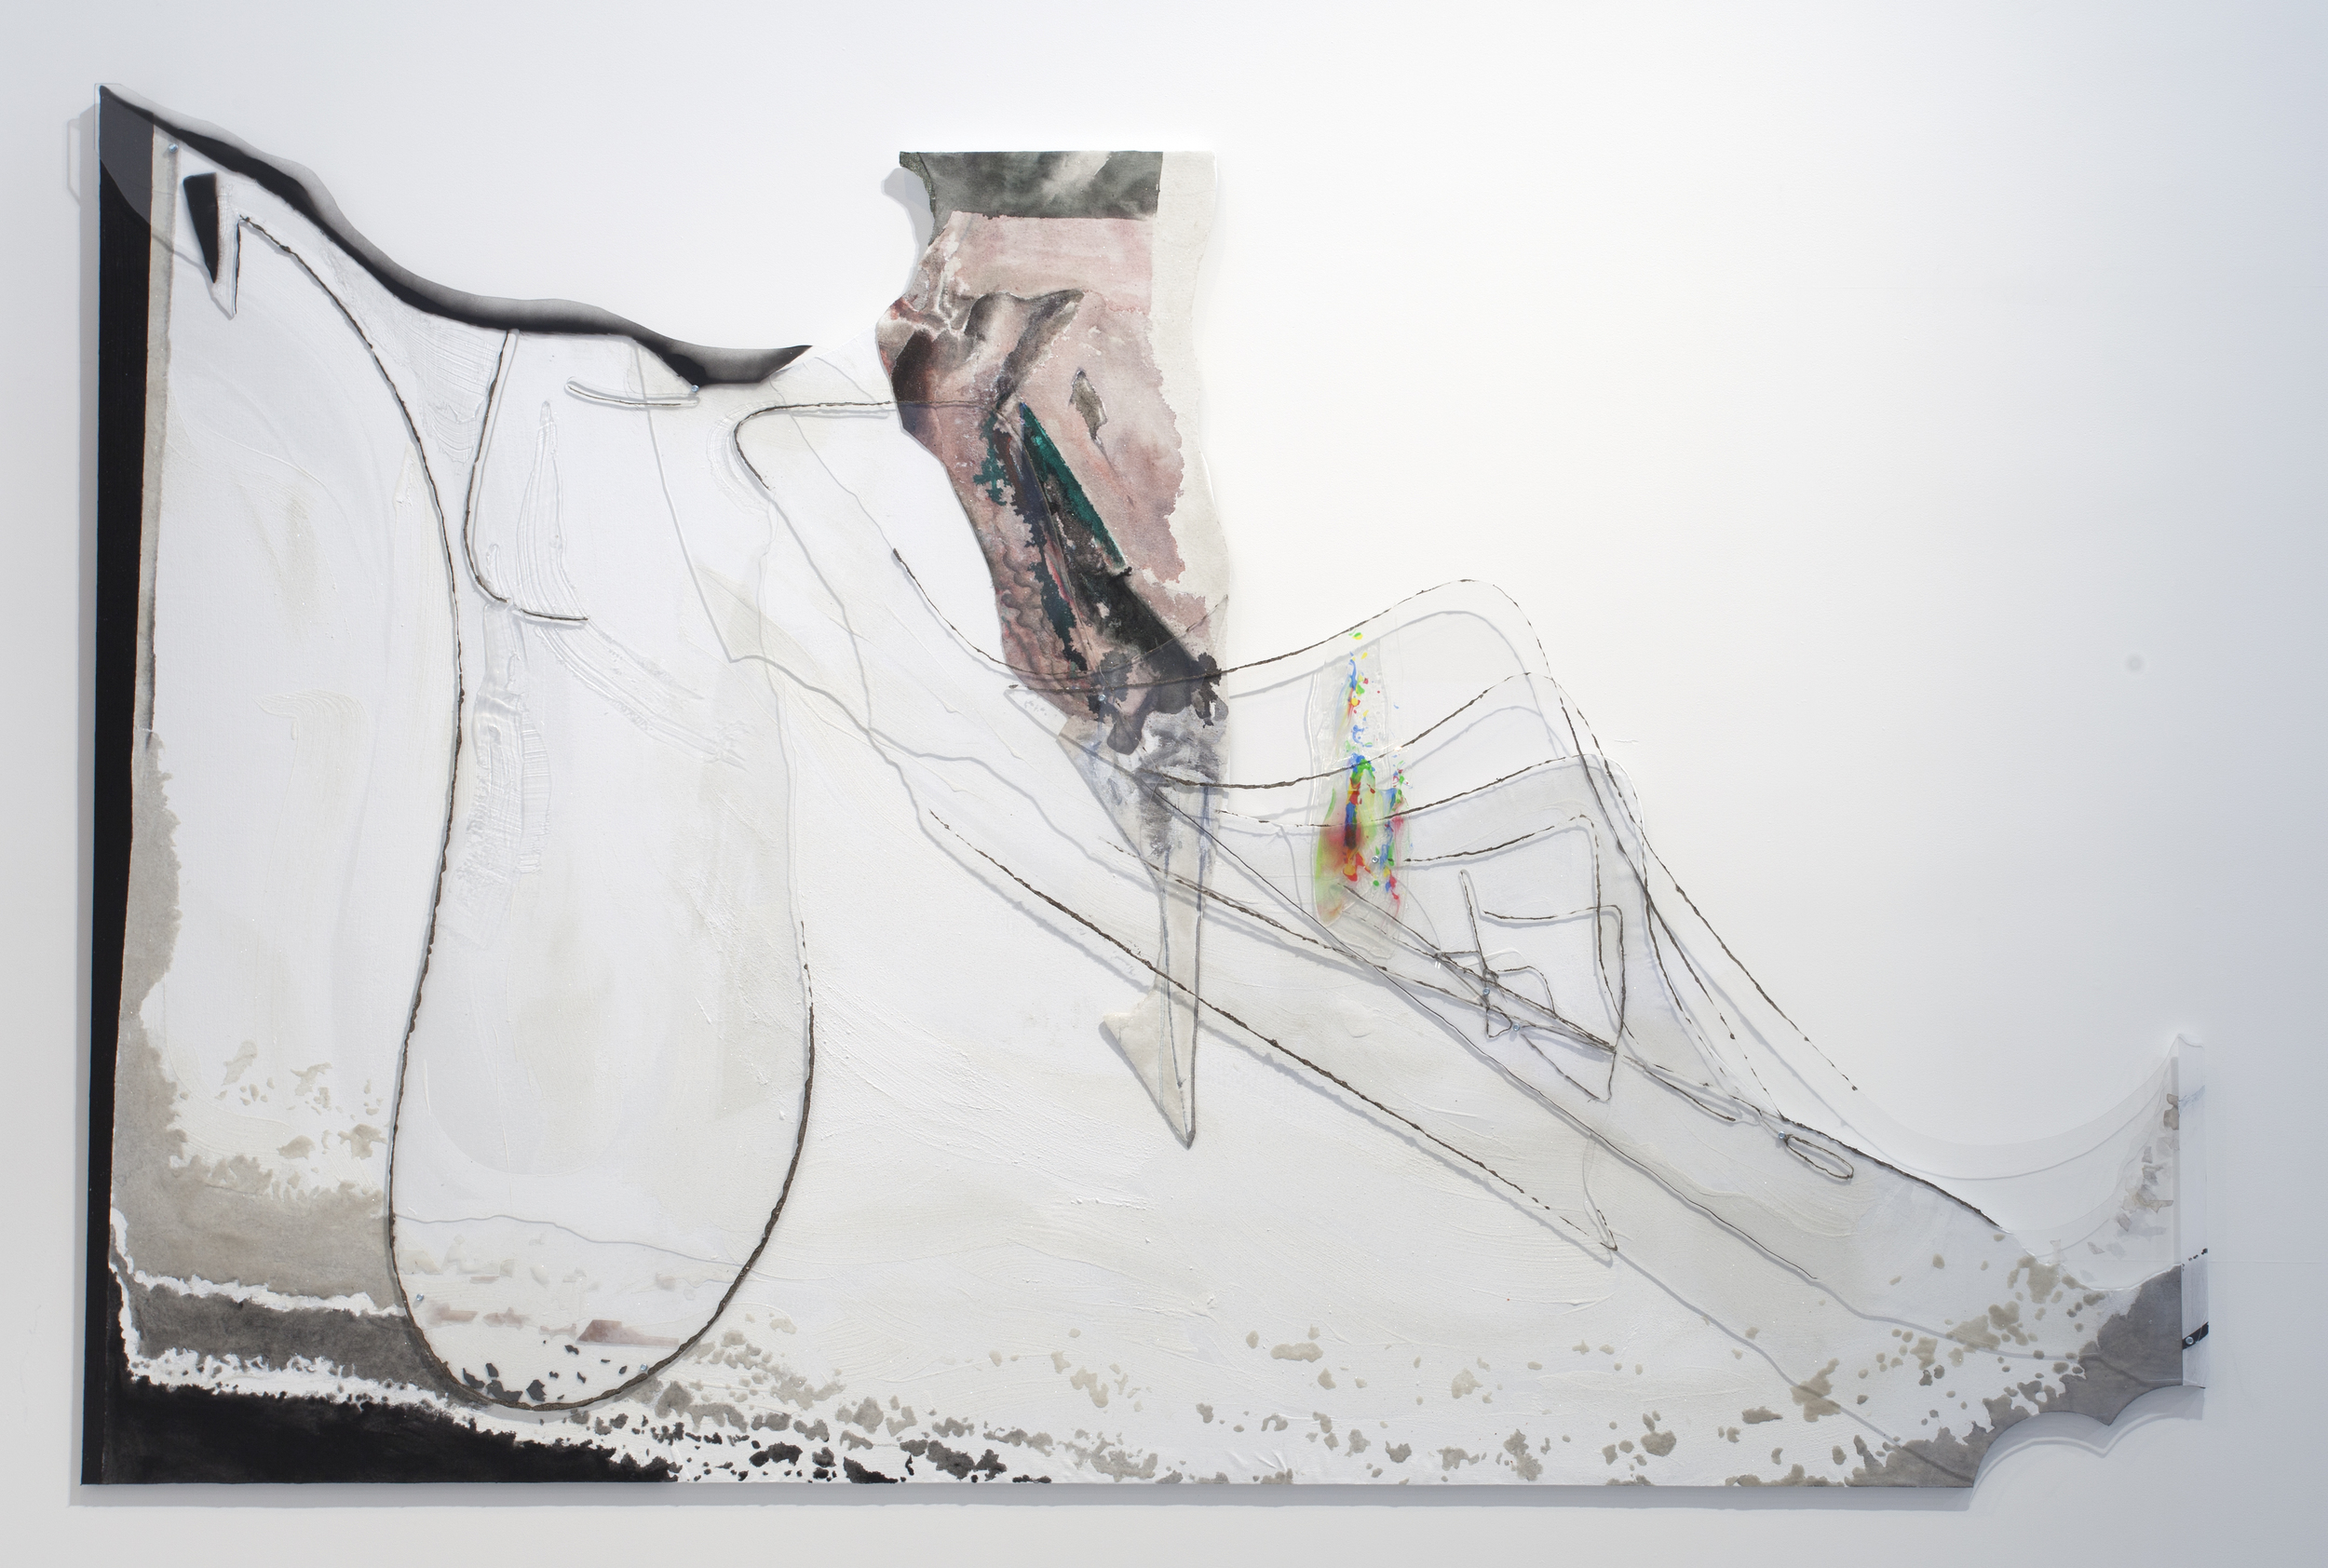  Leslie Shows,  The Marquis's Opinion , 2015 Acrylic, ink, sand, mica, canvas, plexiglass, synthetic rubber, aluminum | 60 x 90 inches | HG13148 